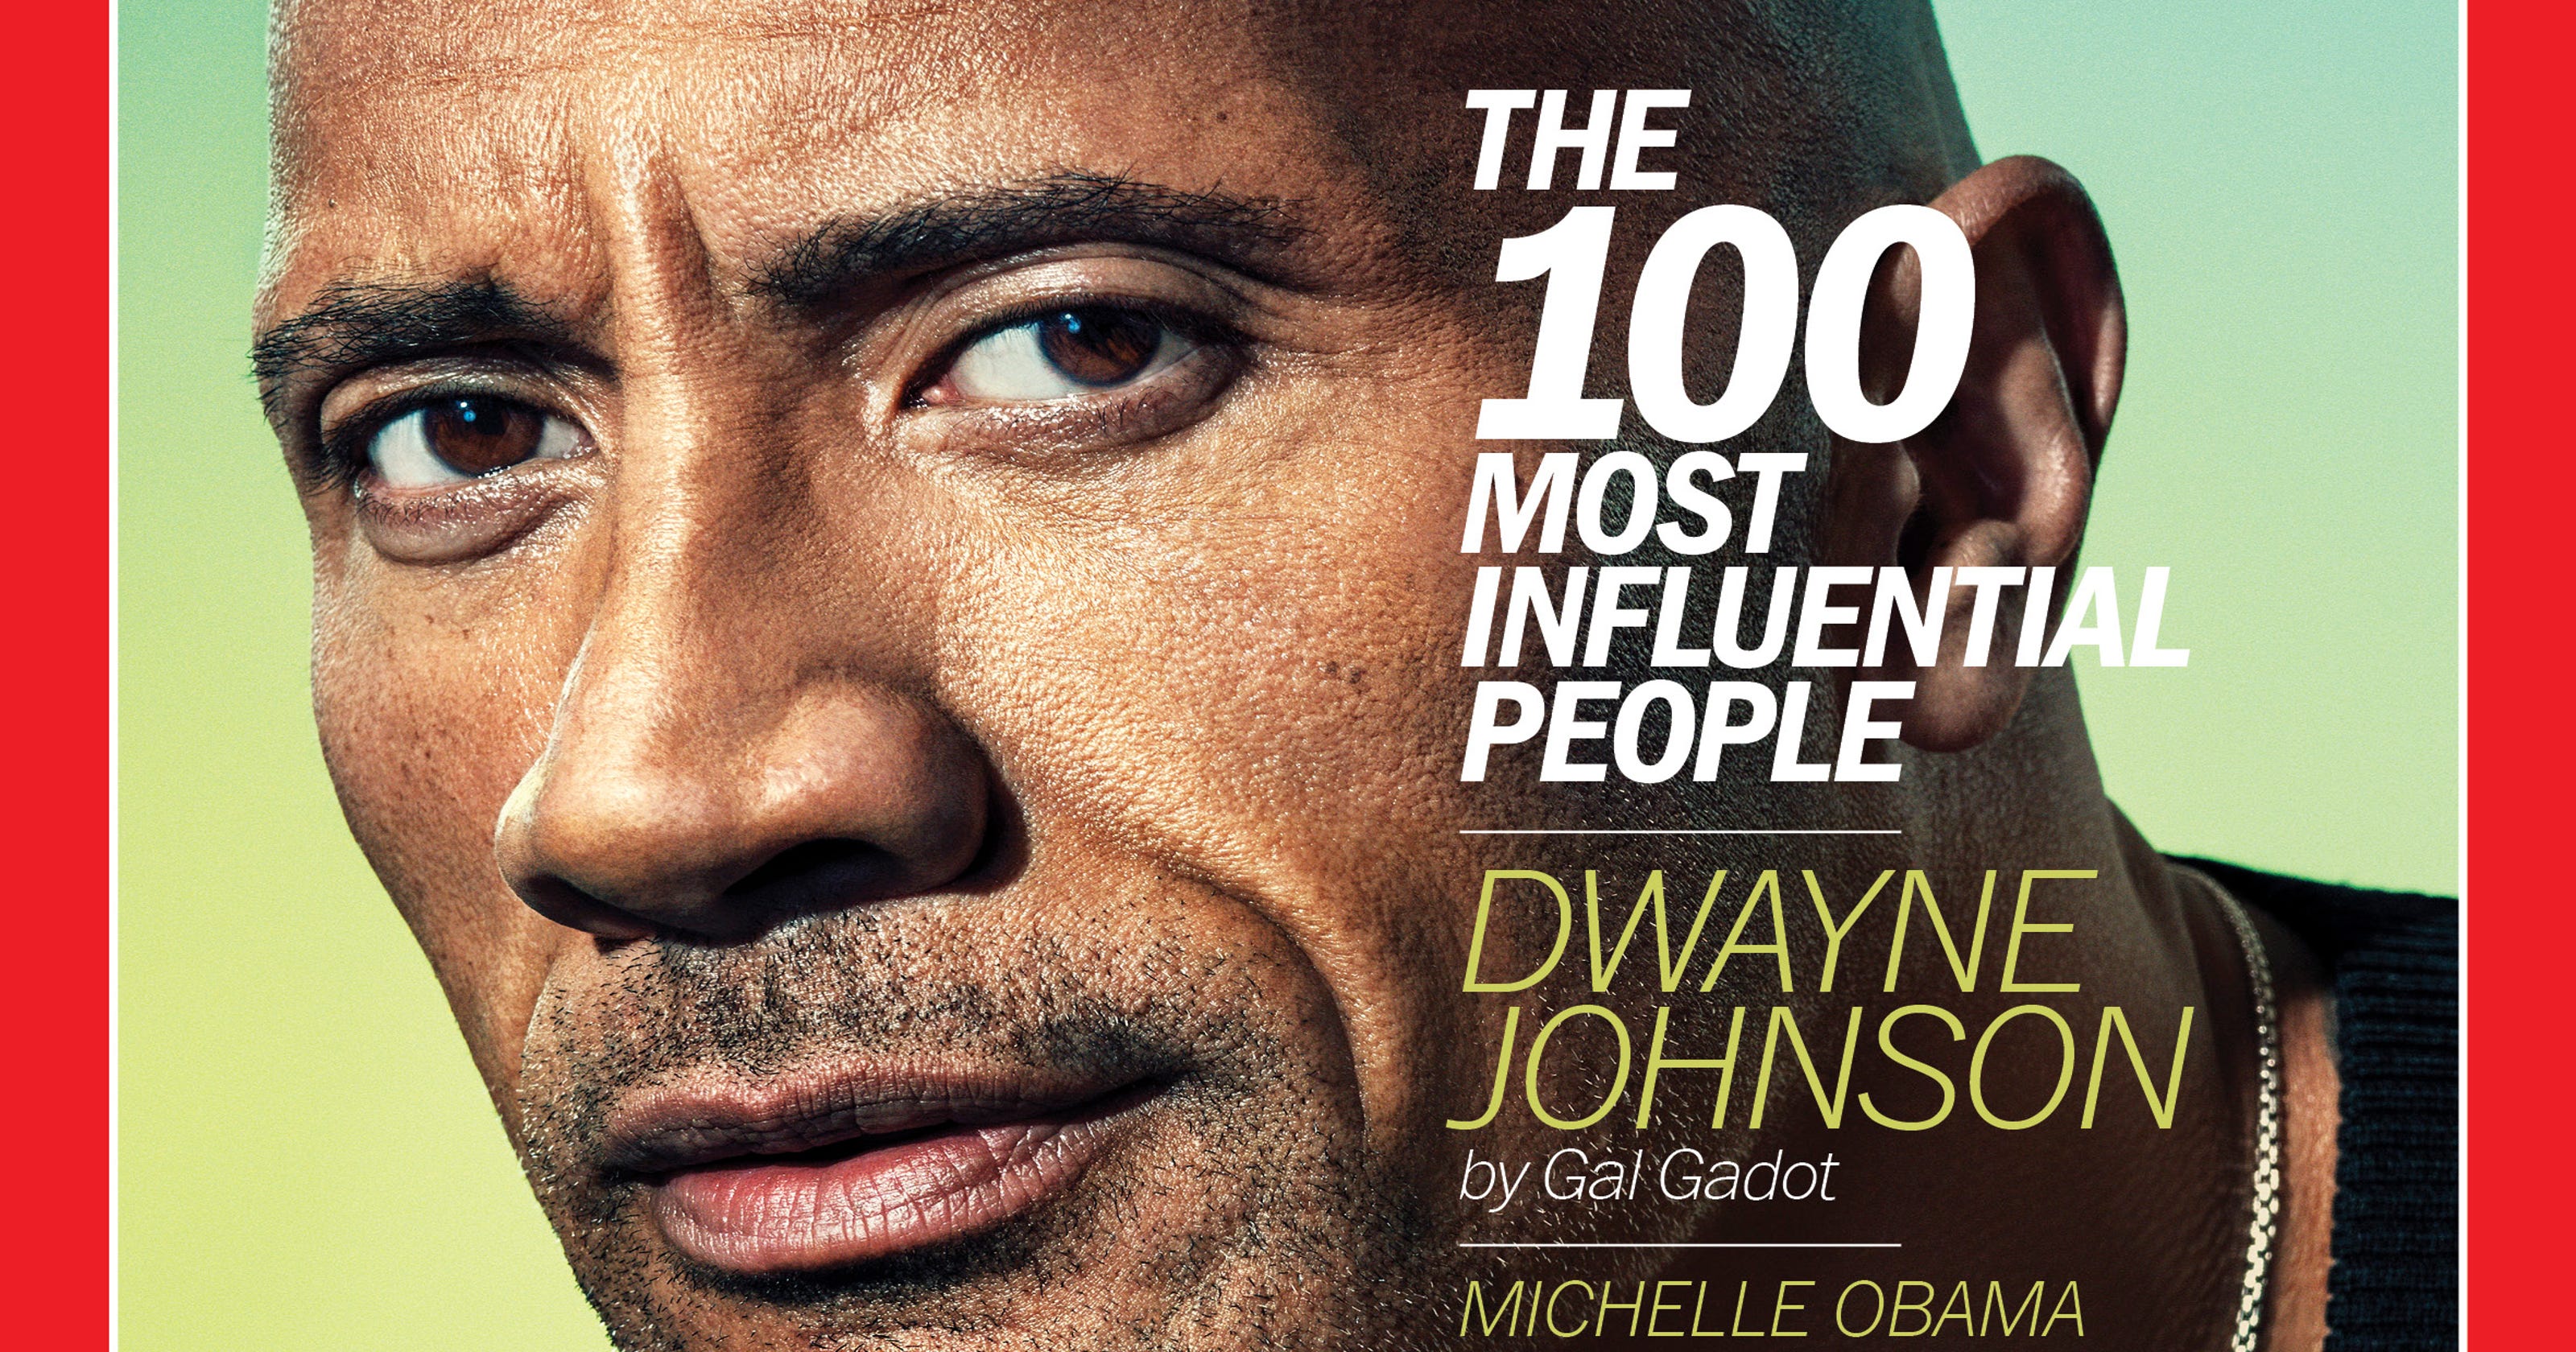 100 Most Influential People Time's '100 Most Influential People' list